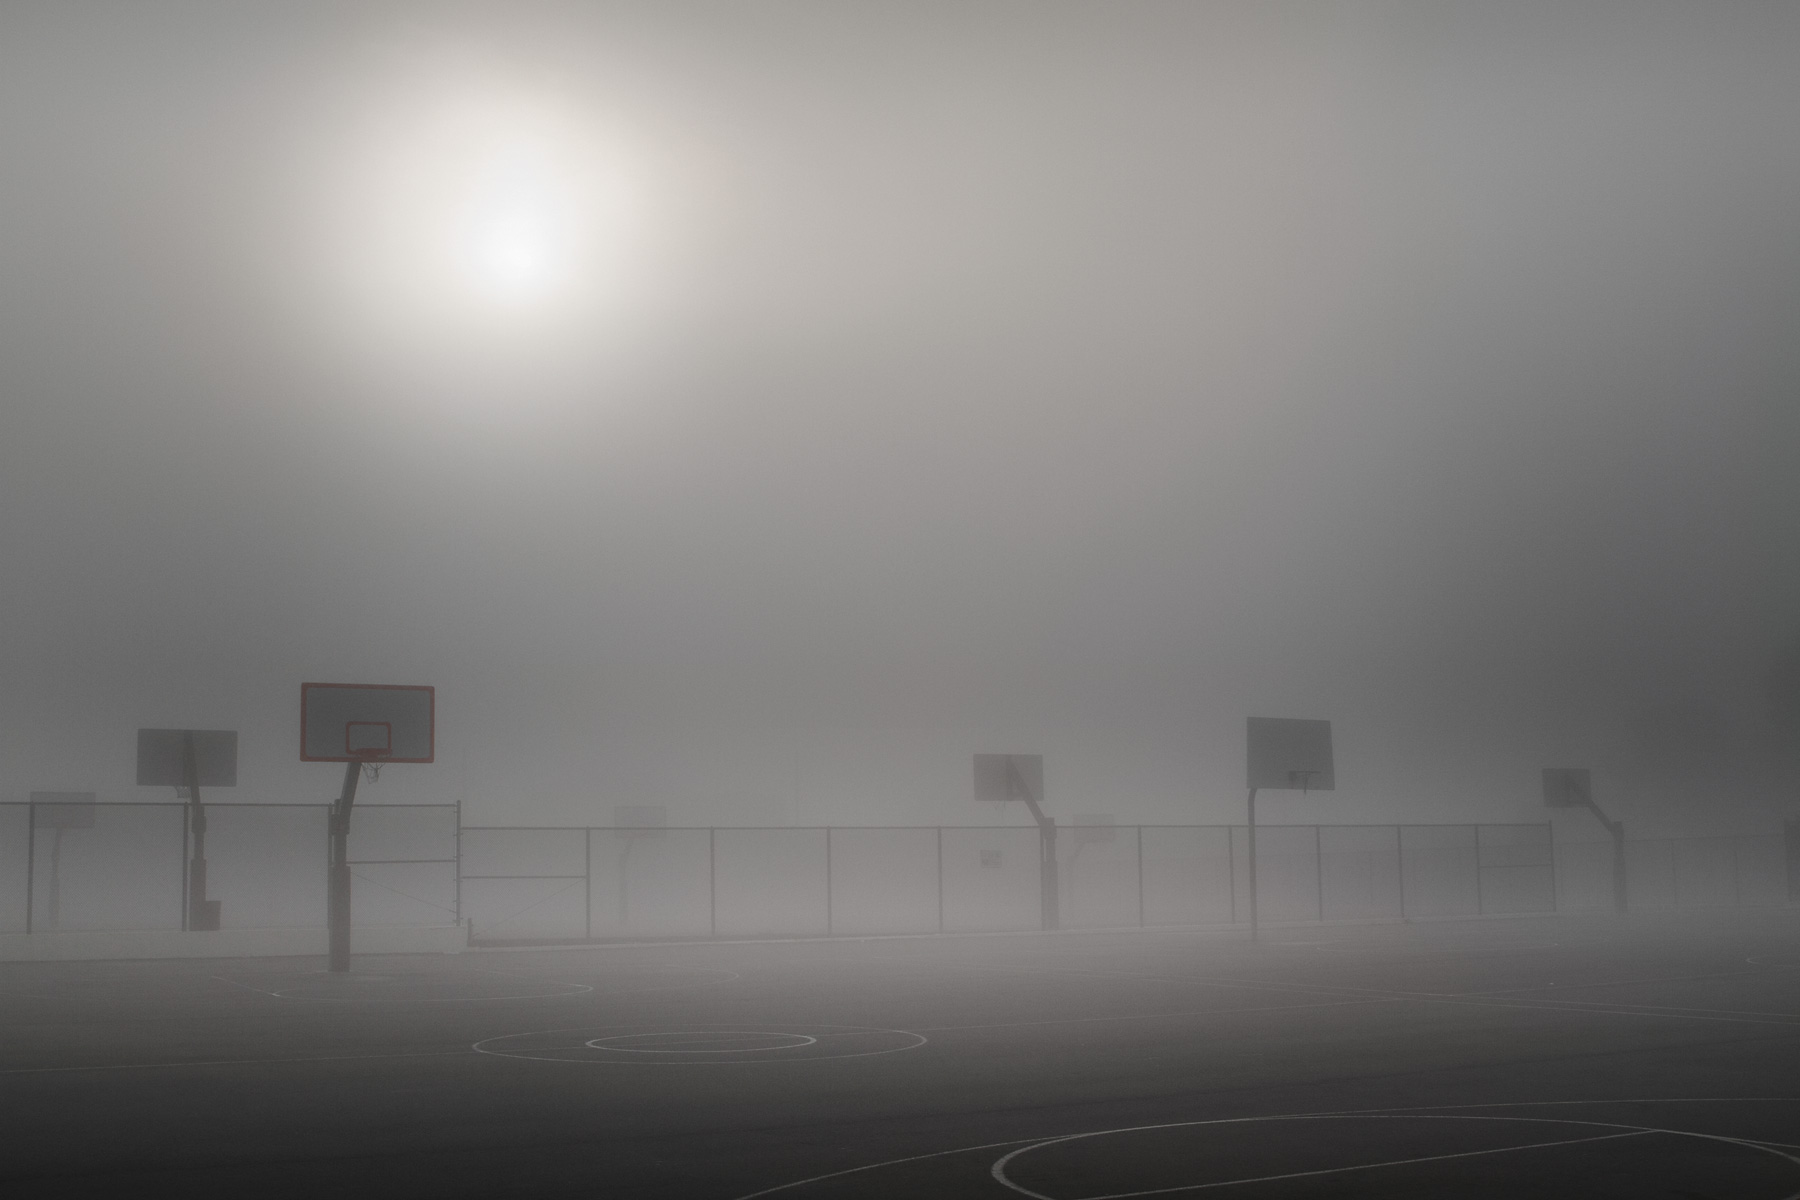 Stephen Austin Welch commercial director & advertising and fine art landscape photographer basketball courts in fog B&W black and white sepia selenium duo-toned photography: moody and dramatic fine art photographs